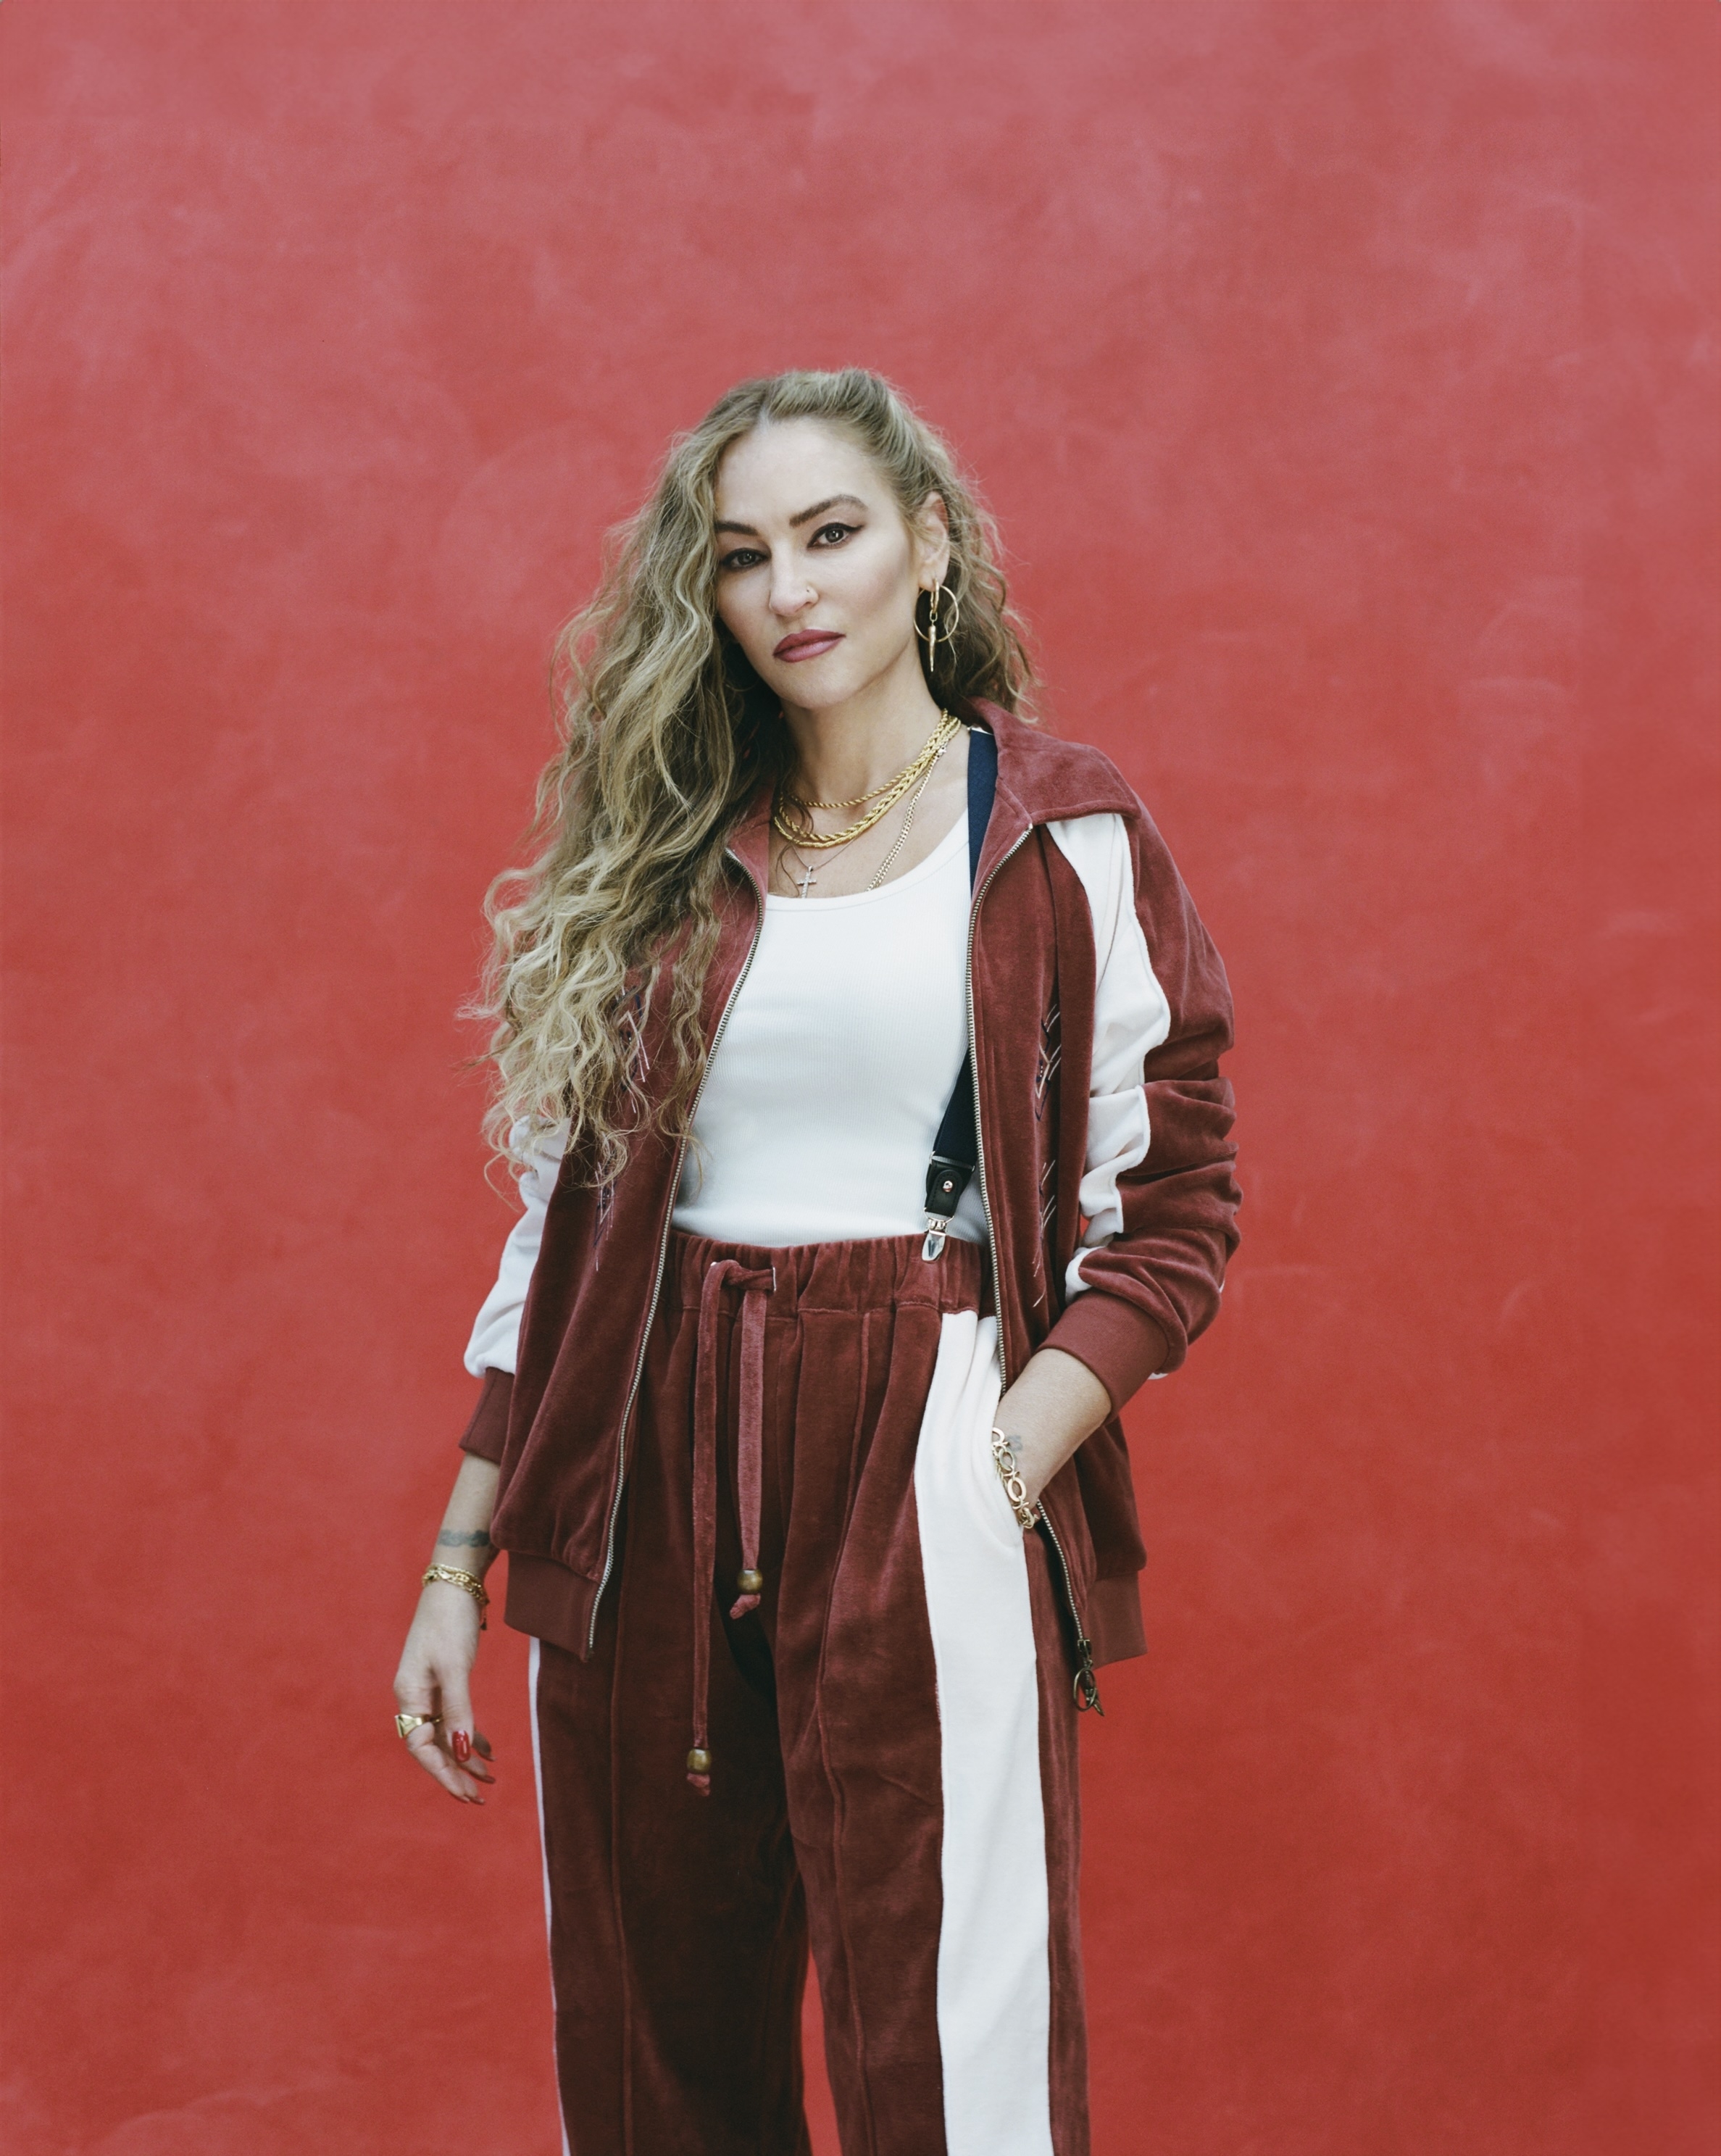 Woman with long curly hair wearing a velour tracksuit and a white tank top, standing with a confident expression against a red background